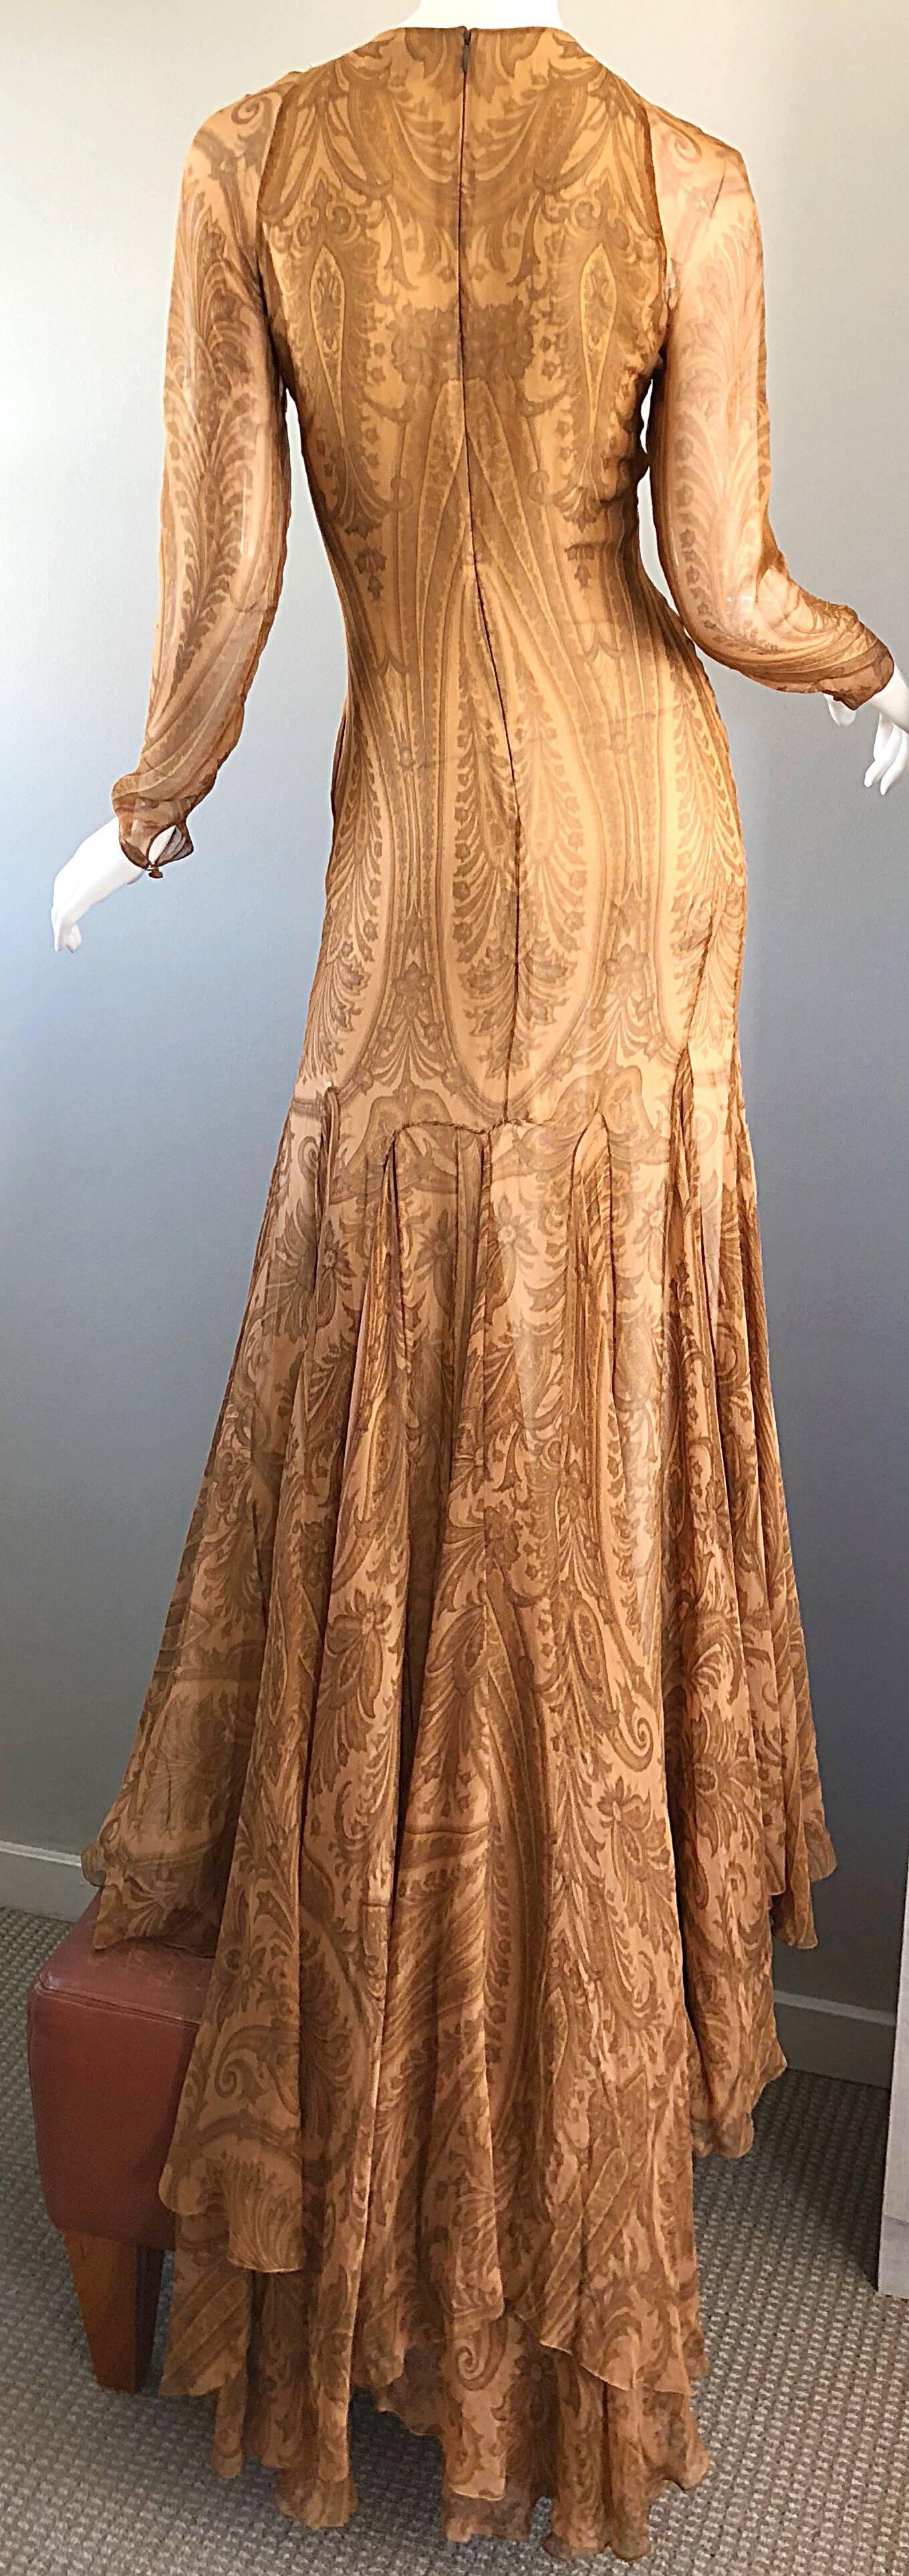 Sensational 1990s Bill Blass Couture Nude Silk Chiffon Paisley Vintage 90s Gown  For Sale 10